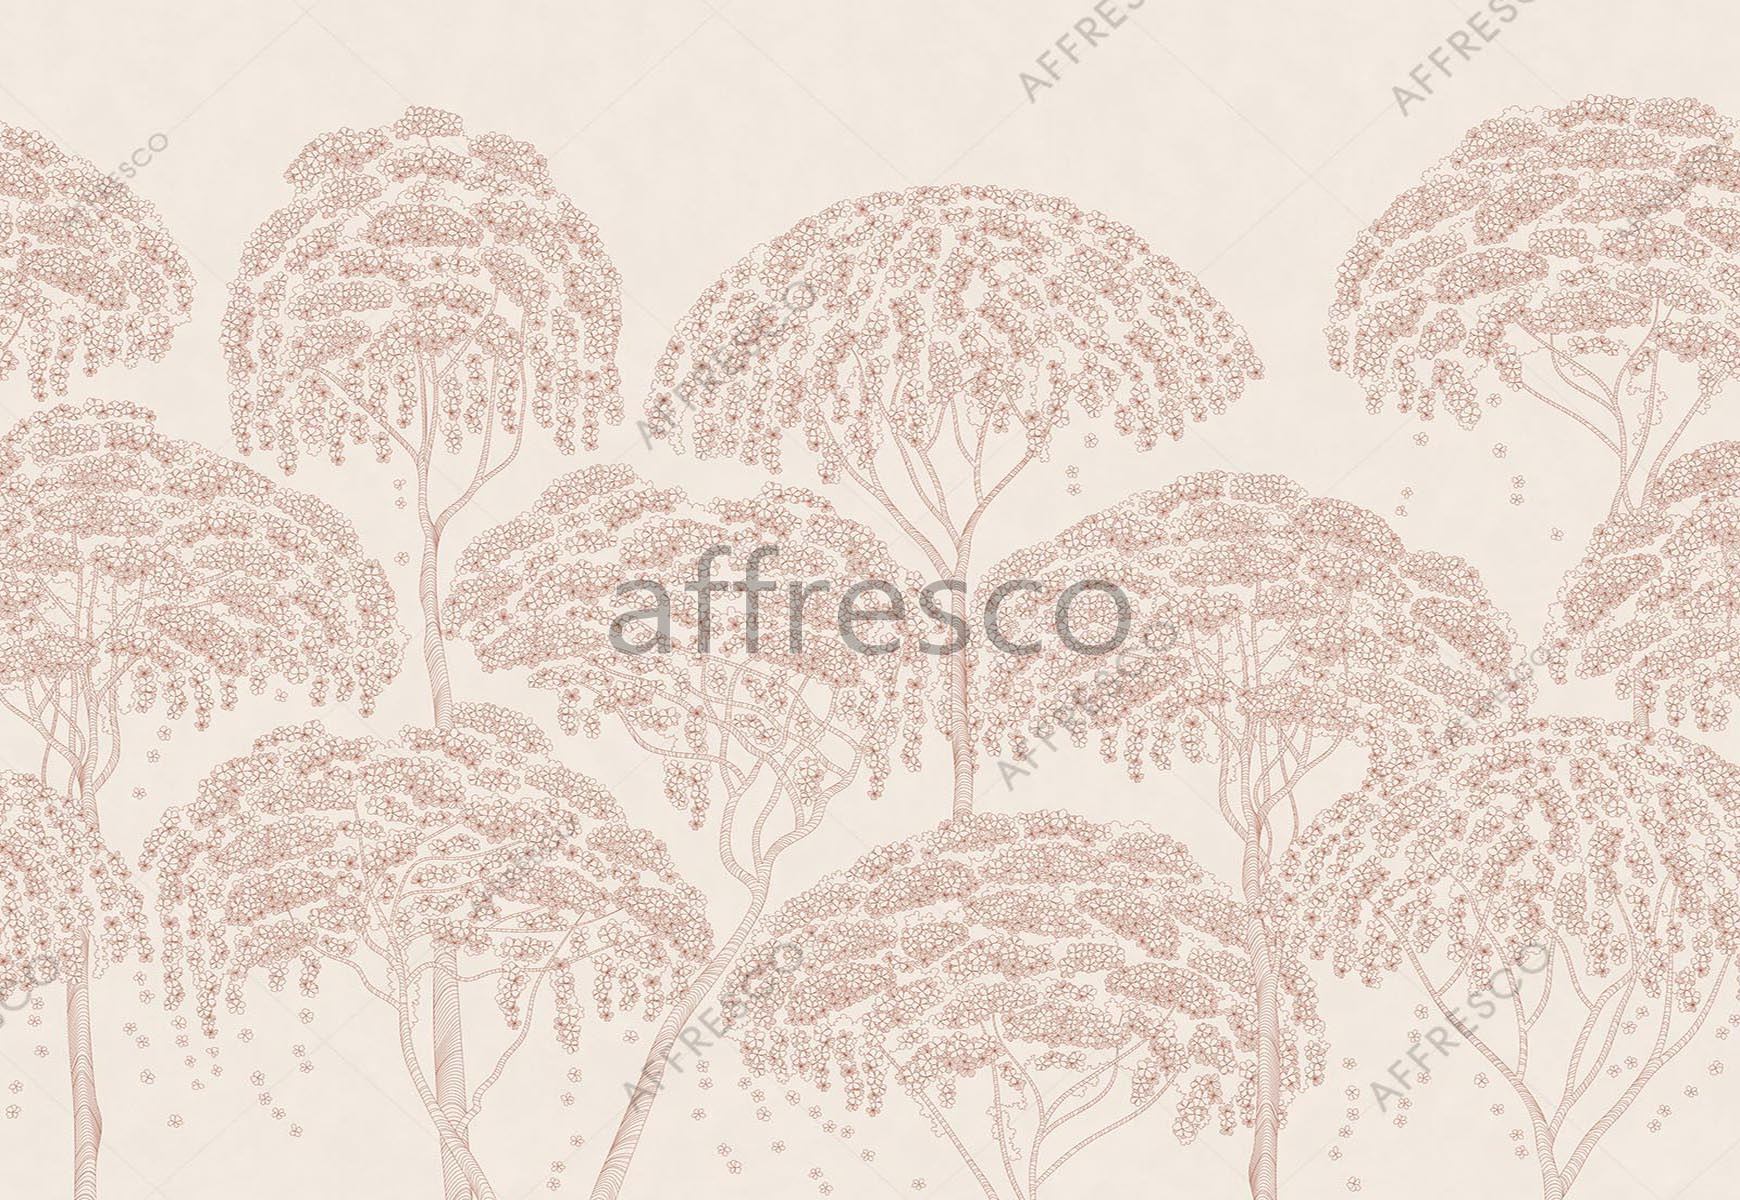 ID139226 | Forest | trees graphics | Affresco Factory